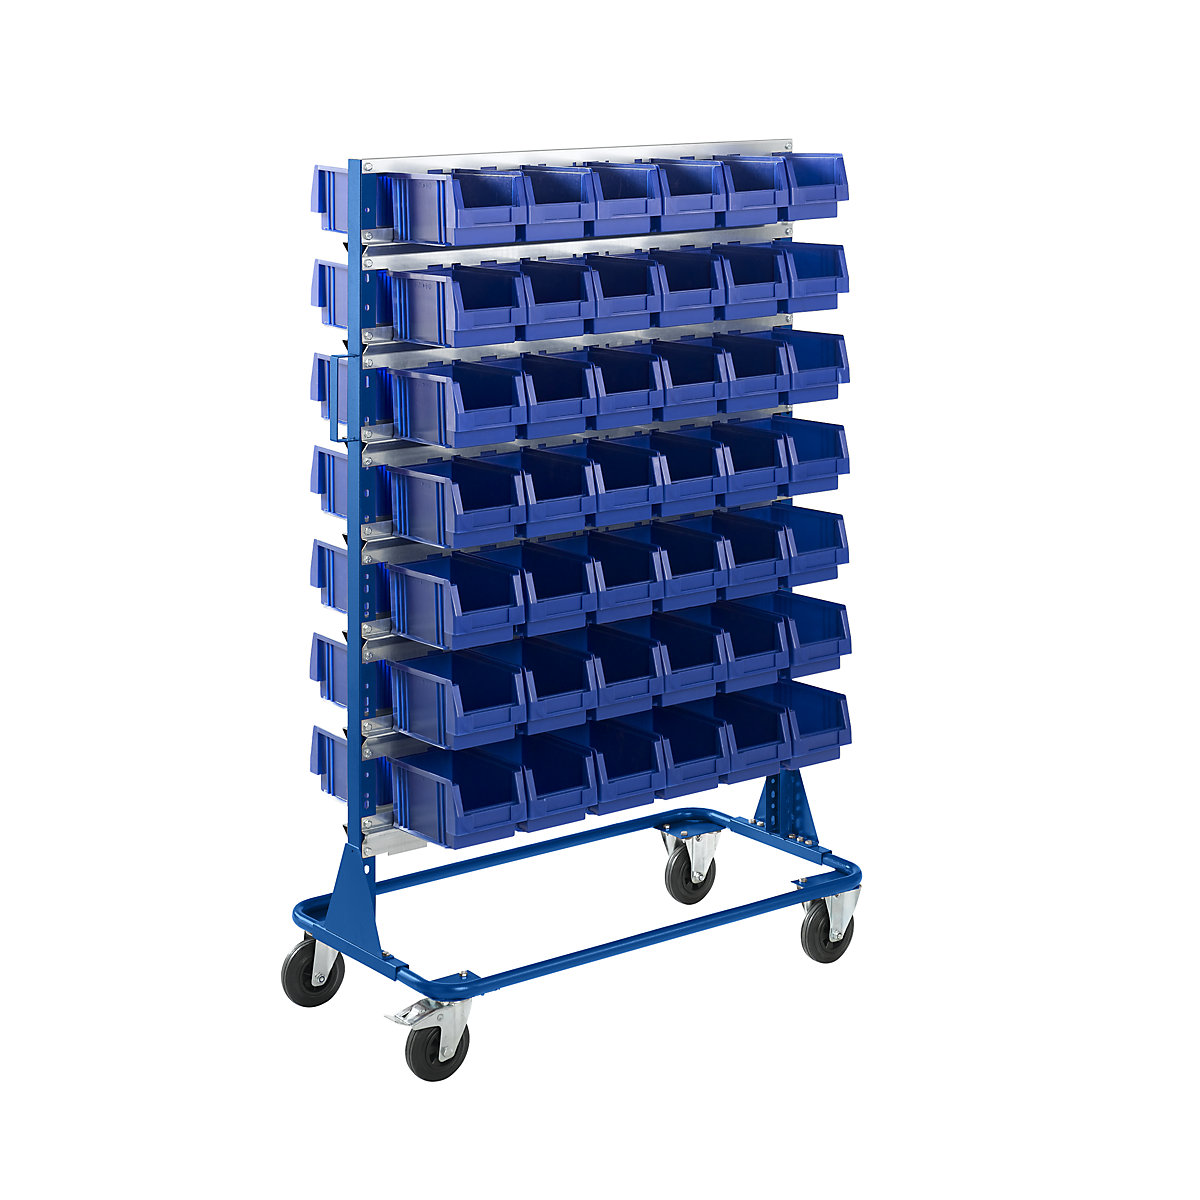 Mobile rack, height 1588 mm, mobile rack with 84 open fronted storage bins, gentian blue-6